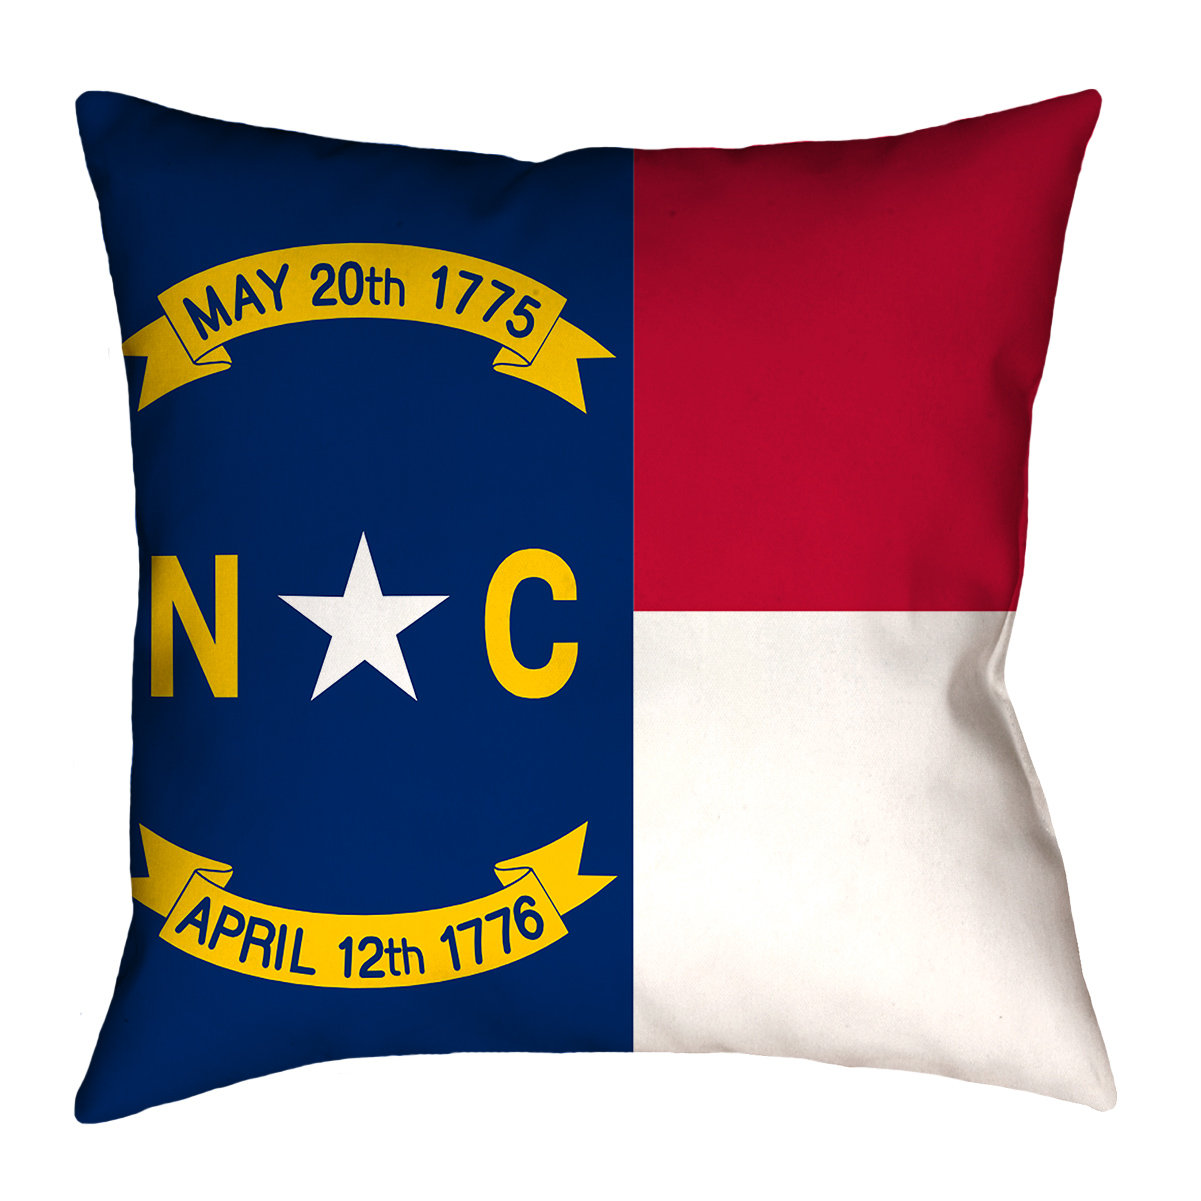 ArtVerse Katelyn Smith 40 x 40 Floor Double Sided Print with Concealed Zipper & Insert North Carolina Outline Pillow 